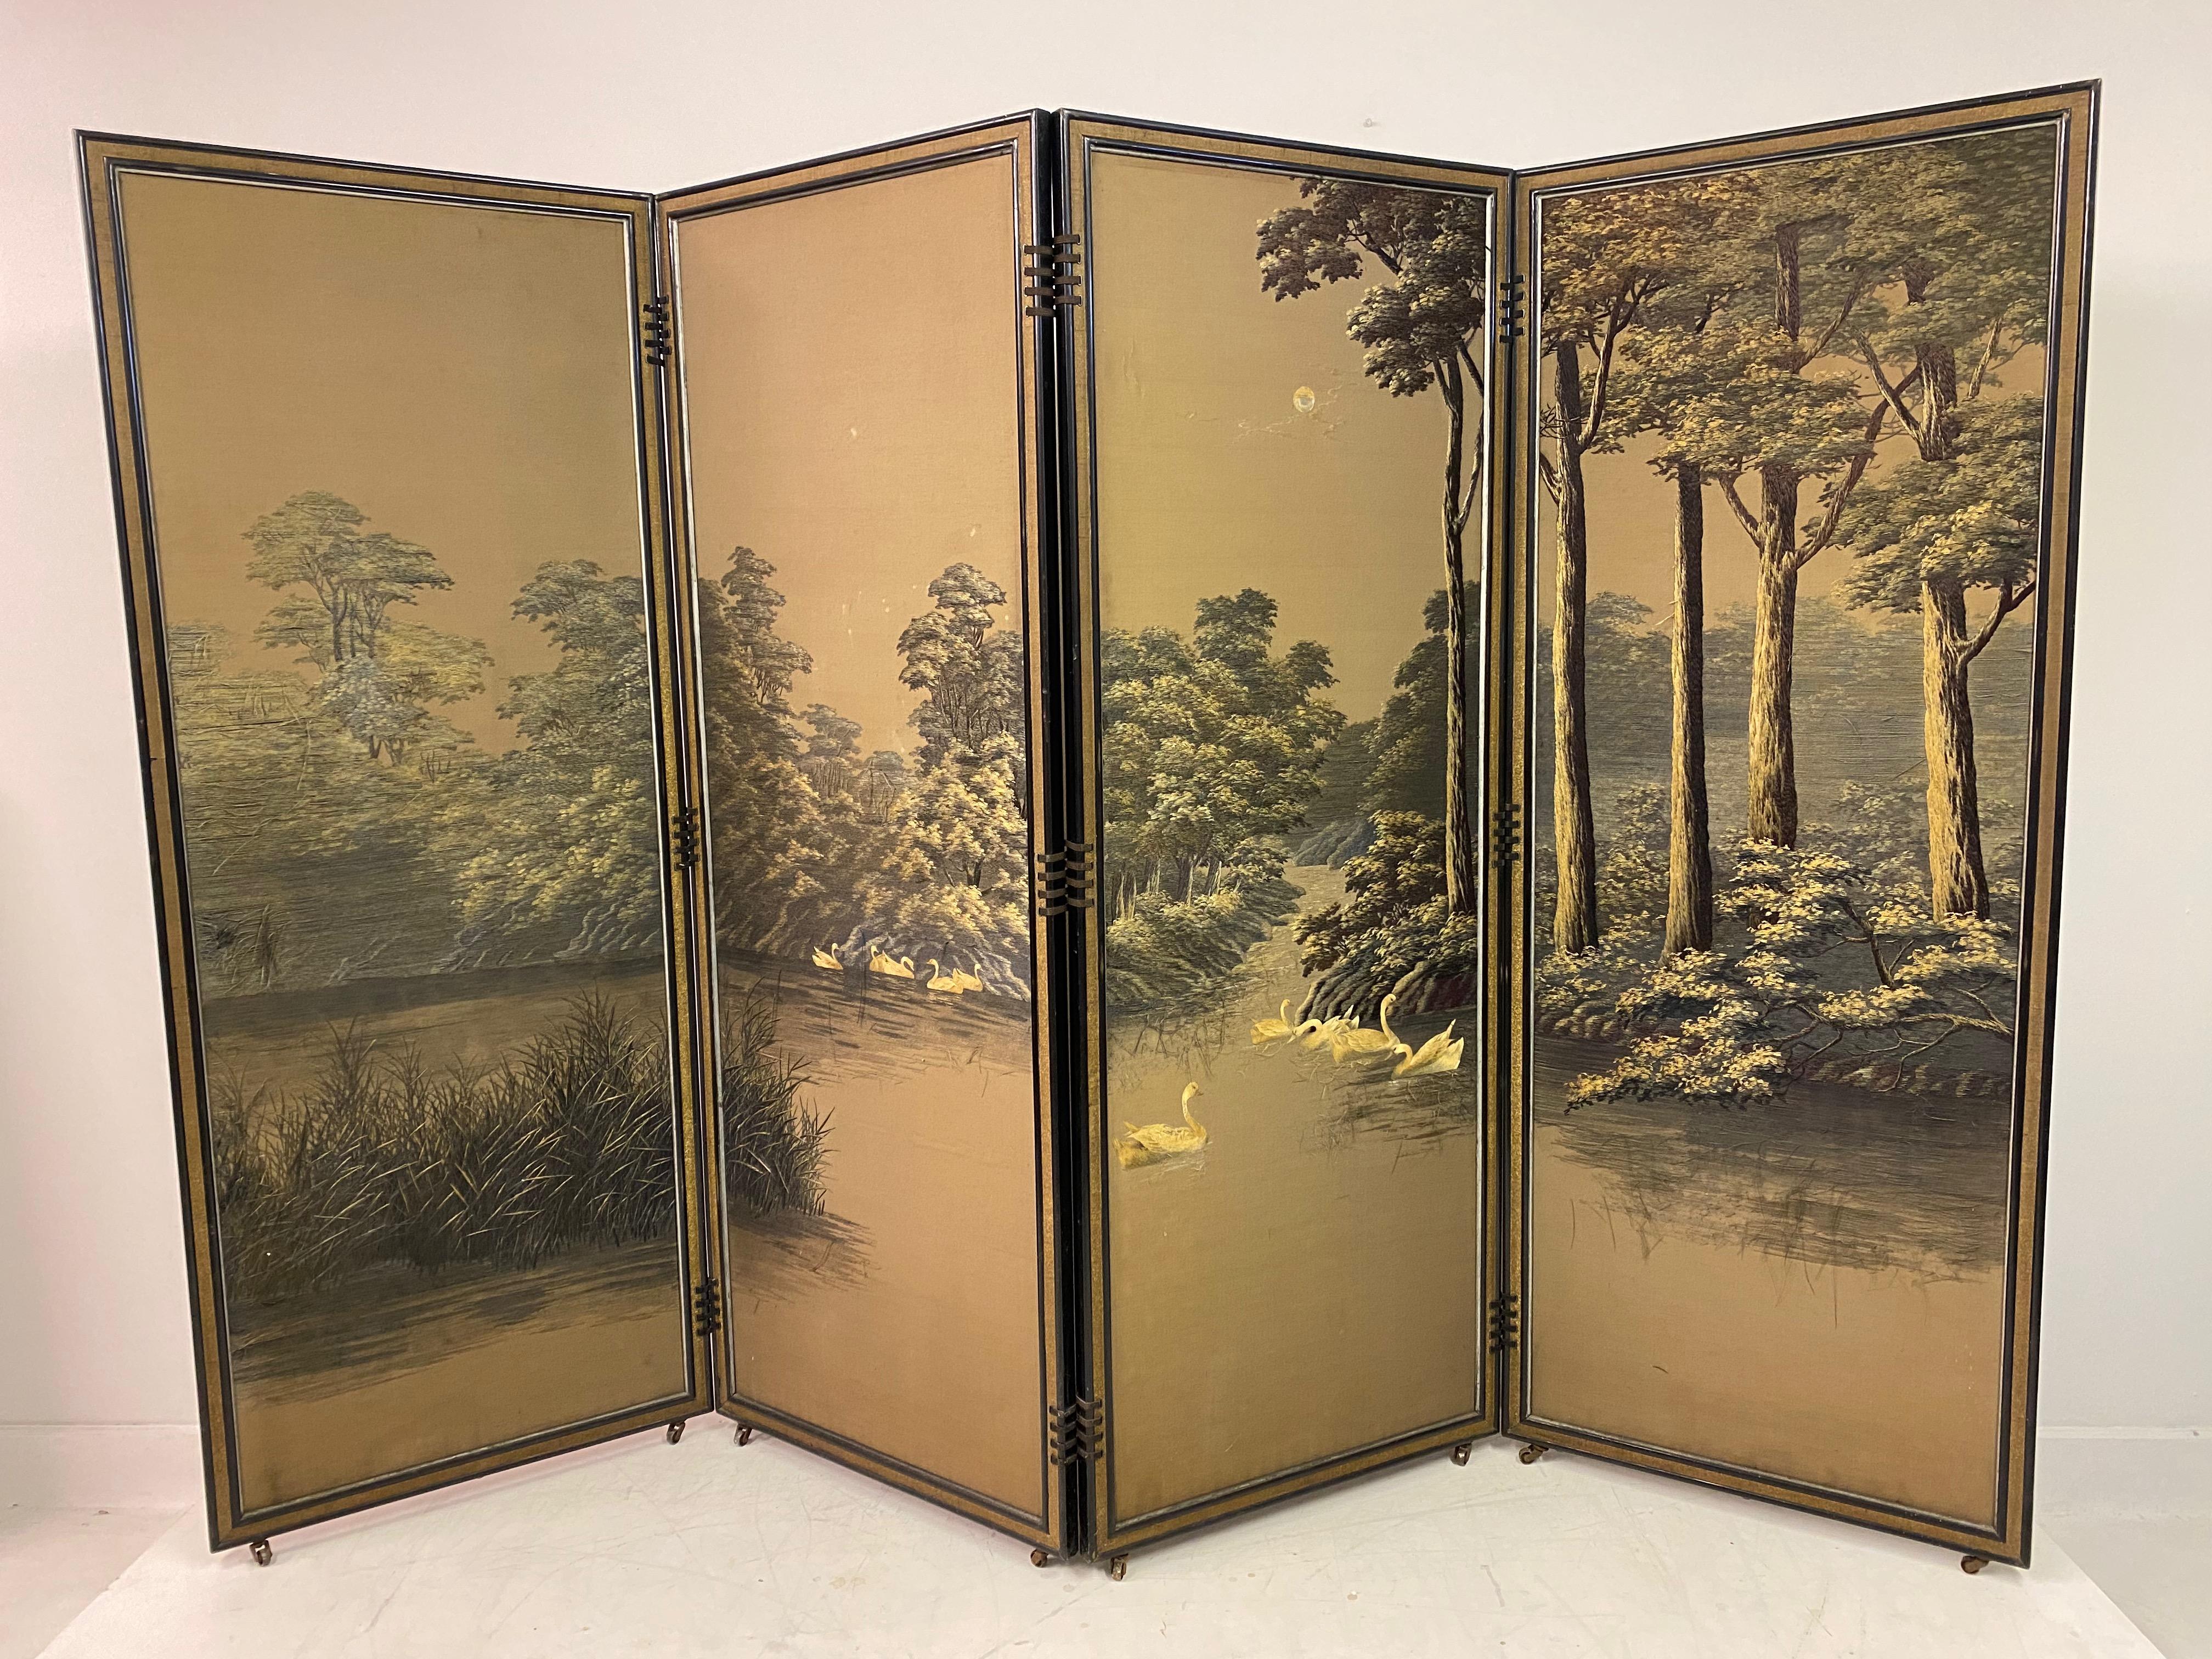 Folding screen

Four sections 

Silk

Black lacquered frame

Couple of small areas of damage and some wear to the embroidery

Japanese Early 20th Century.